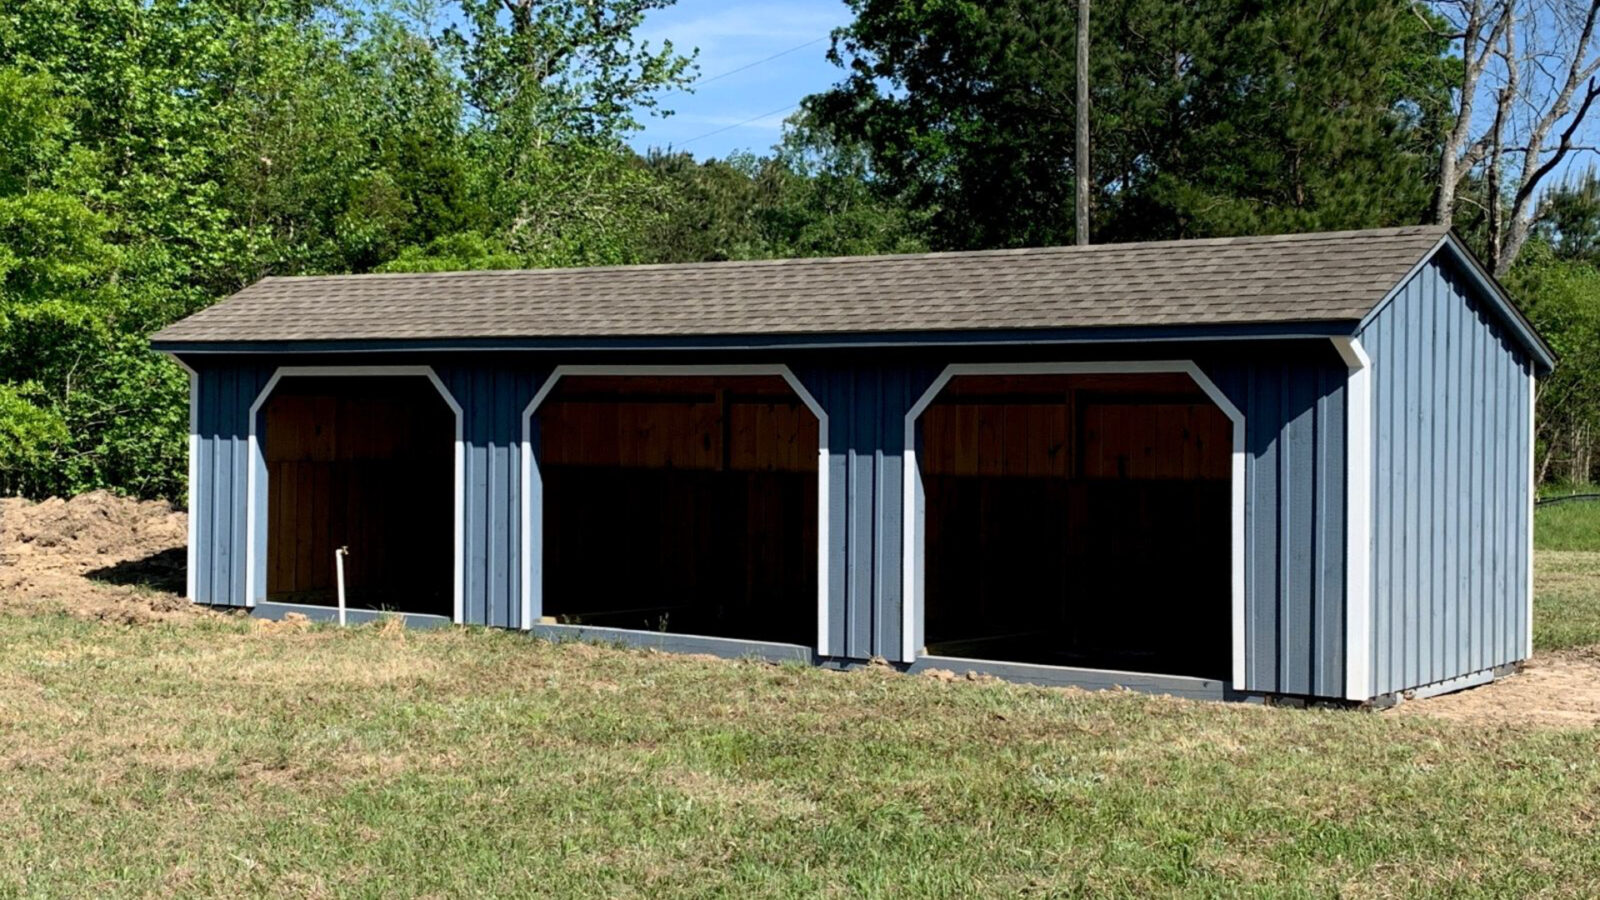 A Run-In horse barn style on the field.